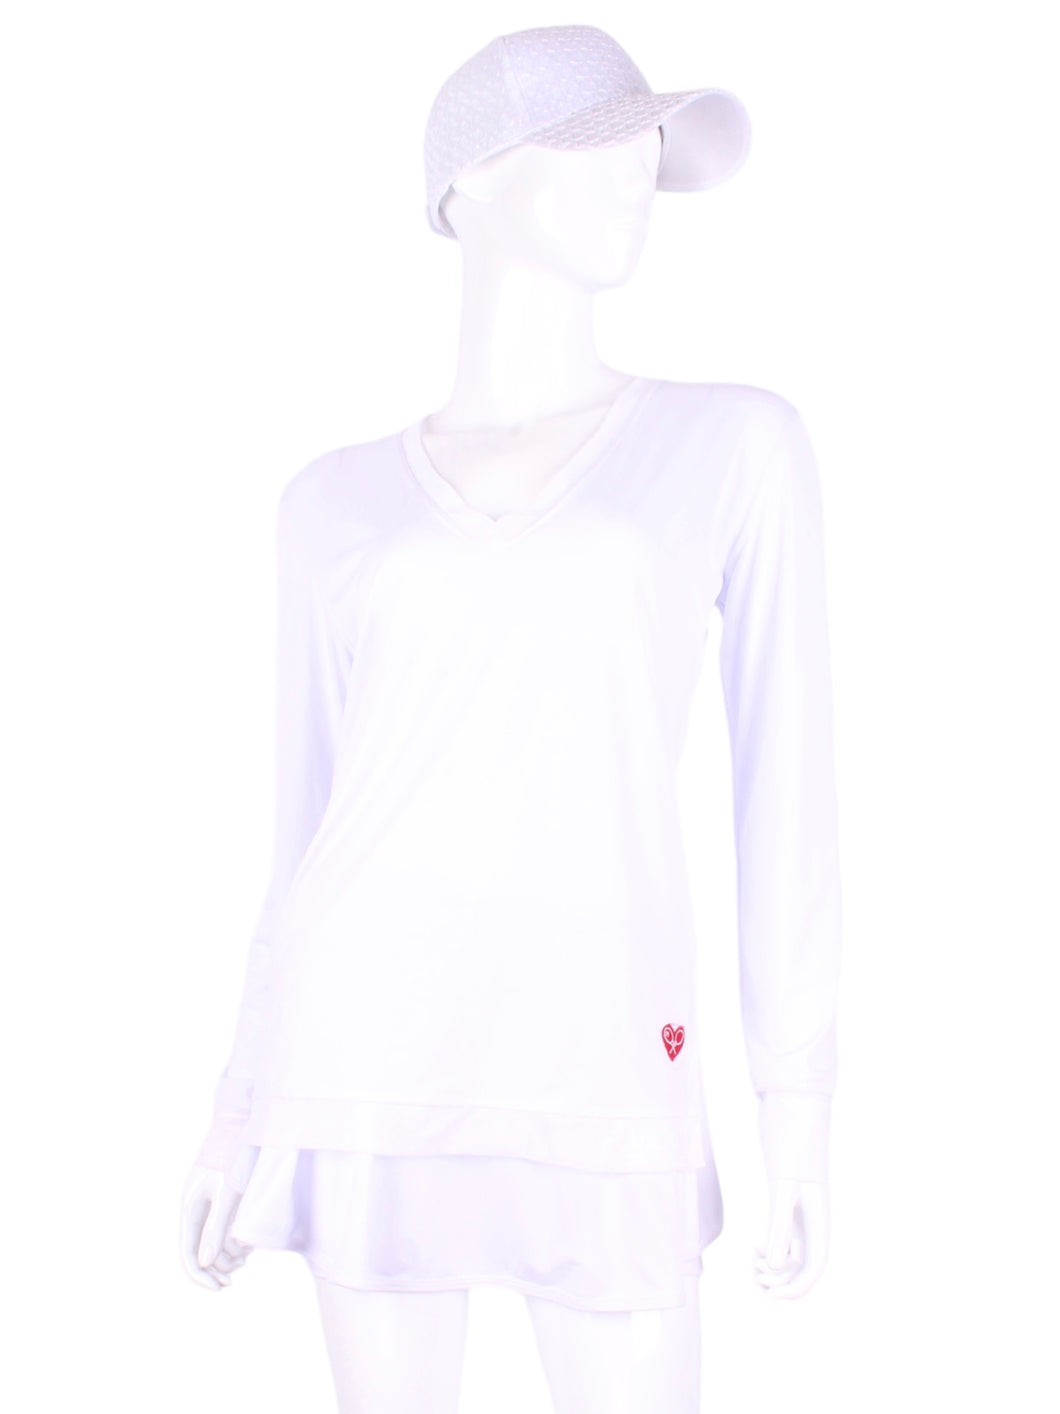 White + White Mesh Trim Long Sleeve Very Vee Tee. This top is soooo gorgeous!  The collar and cuffs are accented with feminine mesh and the body is flowy and soft.  It’s called the Long Sleeve Very Vee Tee - because as you can see - the Vee is - well you know - VERY VEE!  For the tennis lady who loves to leave her chest open - but cover her arms (and other bits) this top is seductive in a sweet way!